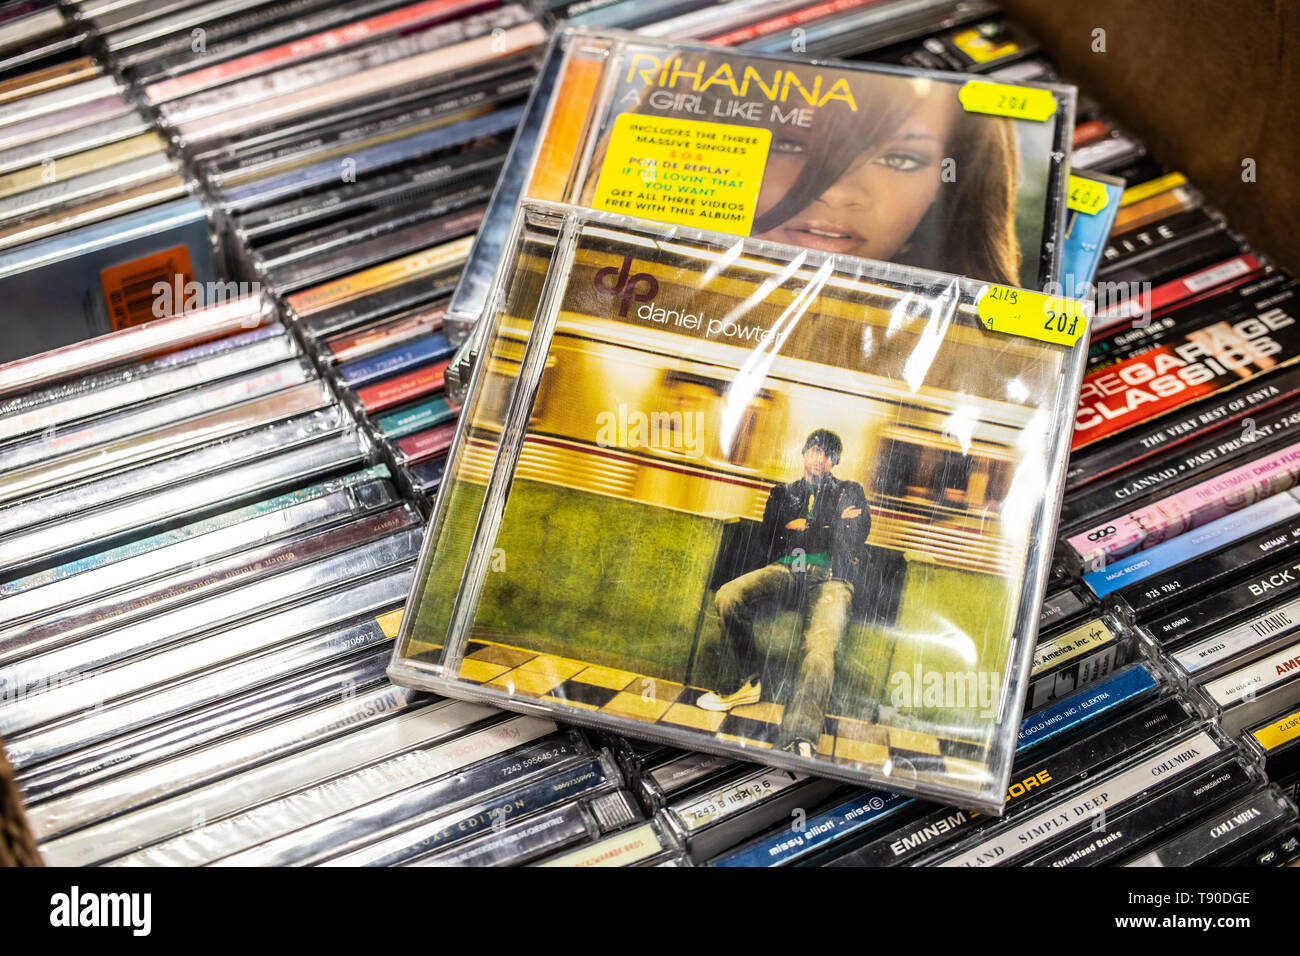 Nadarzyn, Poland, May 11, 2019: Daniel Powter CD album DP 2005 on display for sale, famous Canadian musician and singer, collection of CD music albums Stock Photo